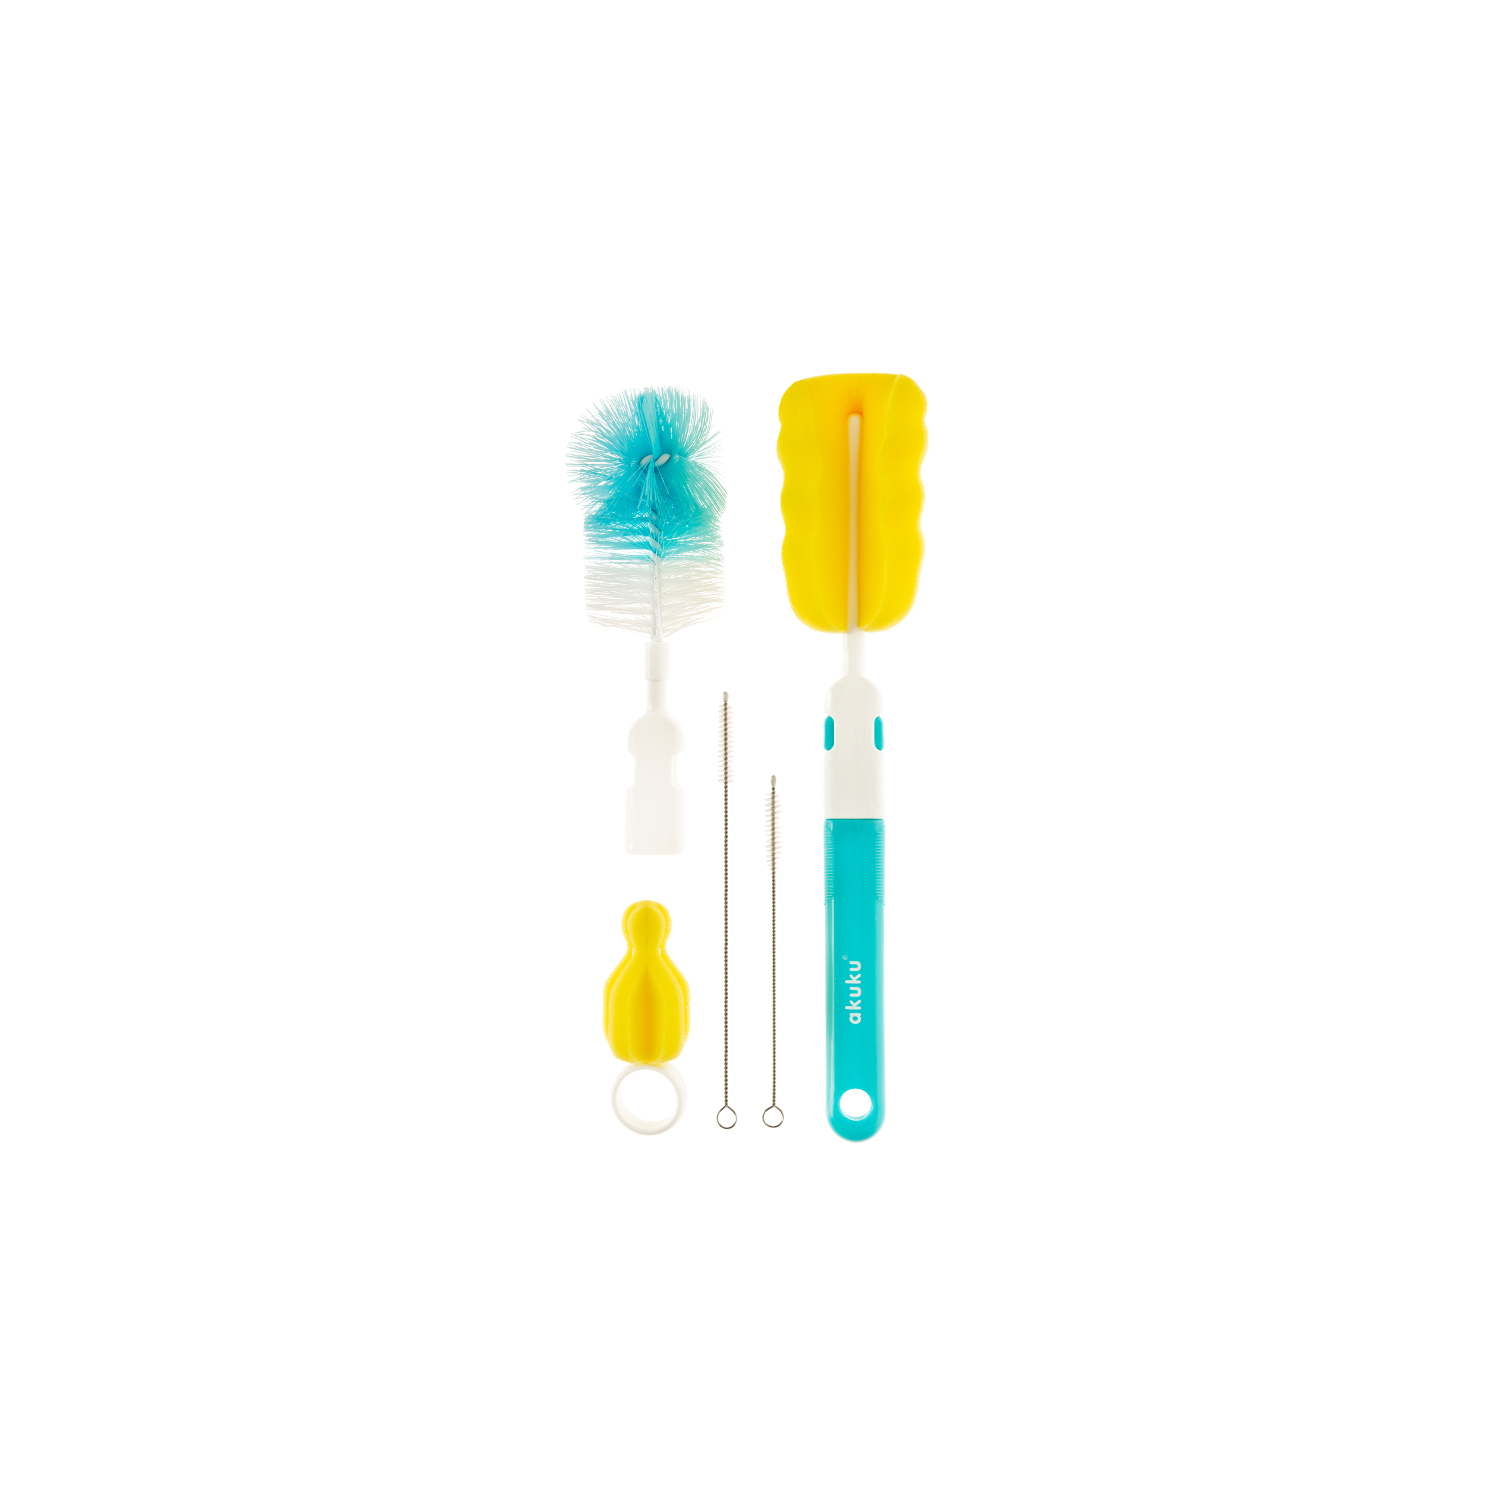 A set of bottle and teat brushes A0410